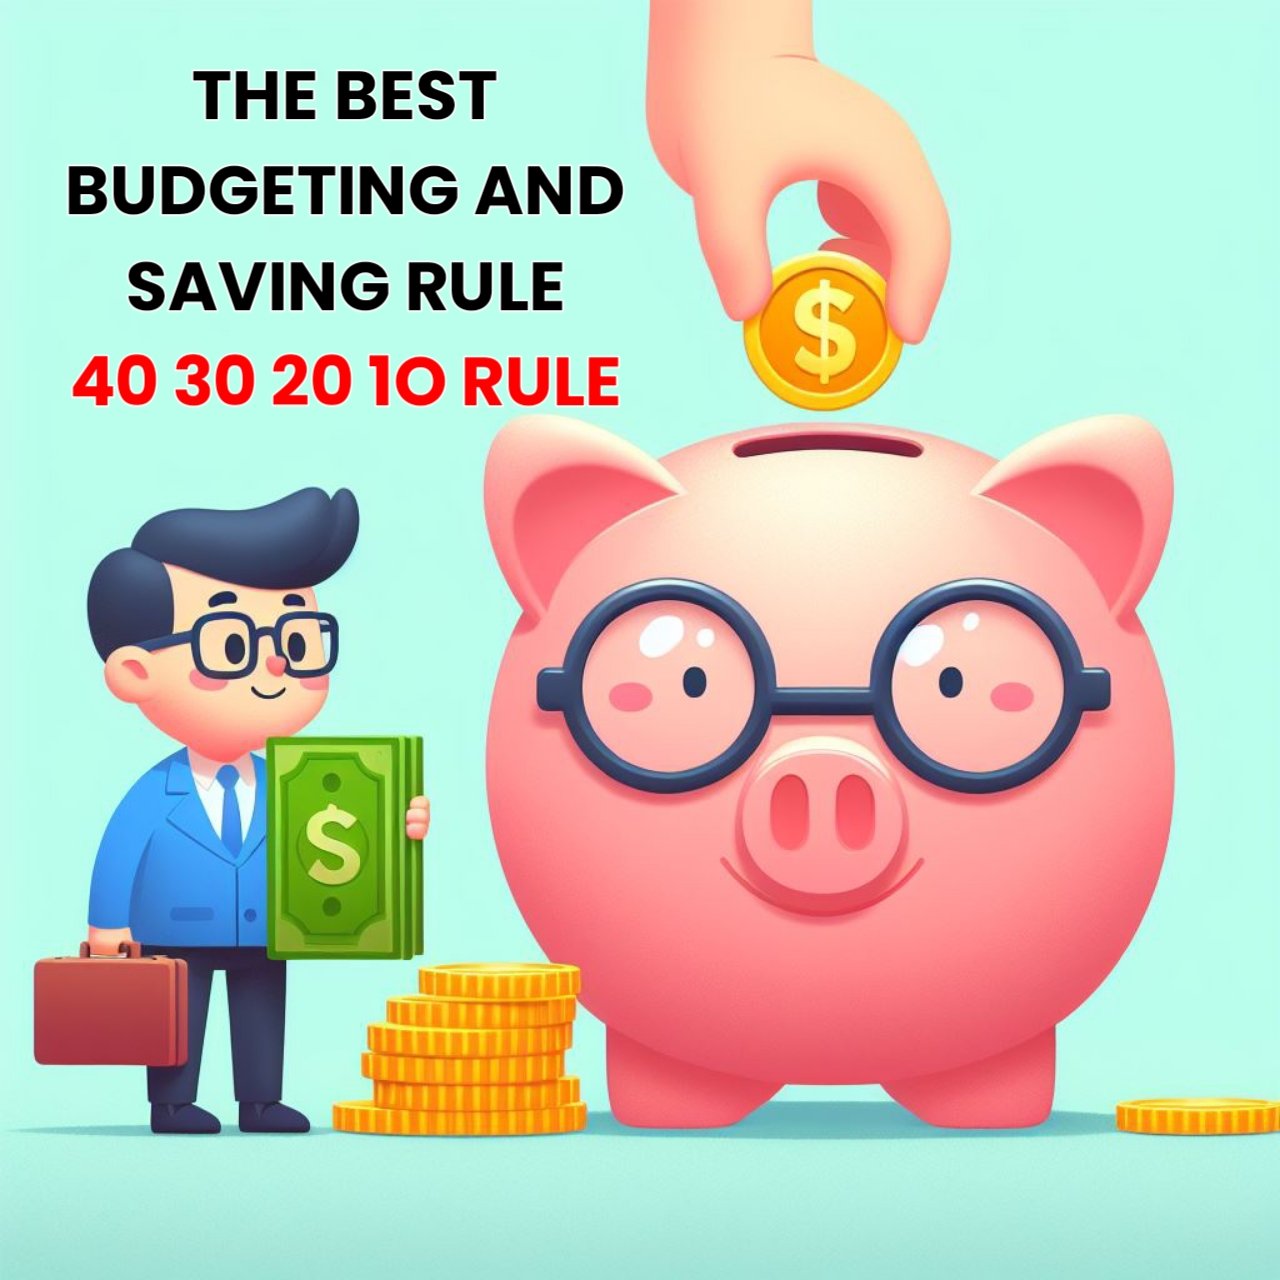 The best budgeting and saving rule the 40 30 20 10 rule